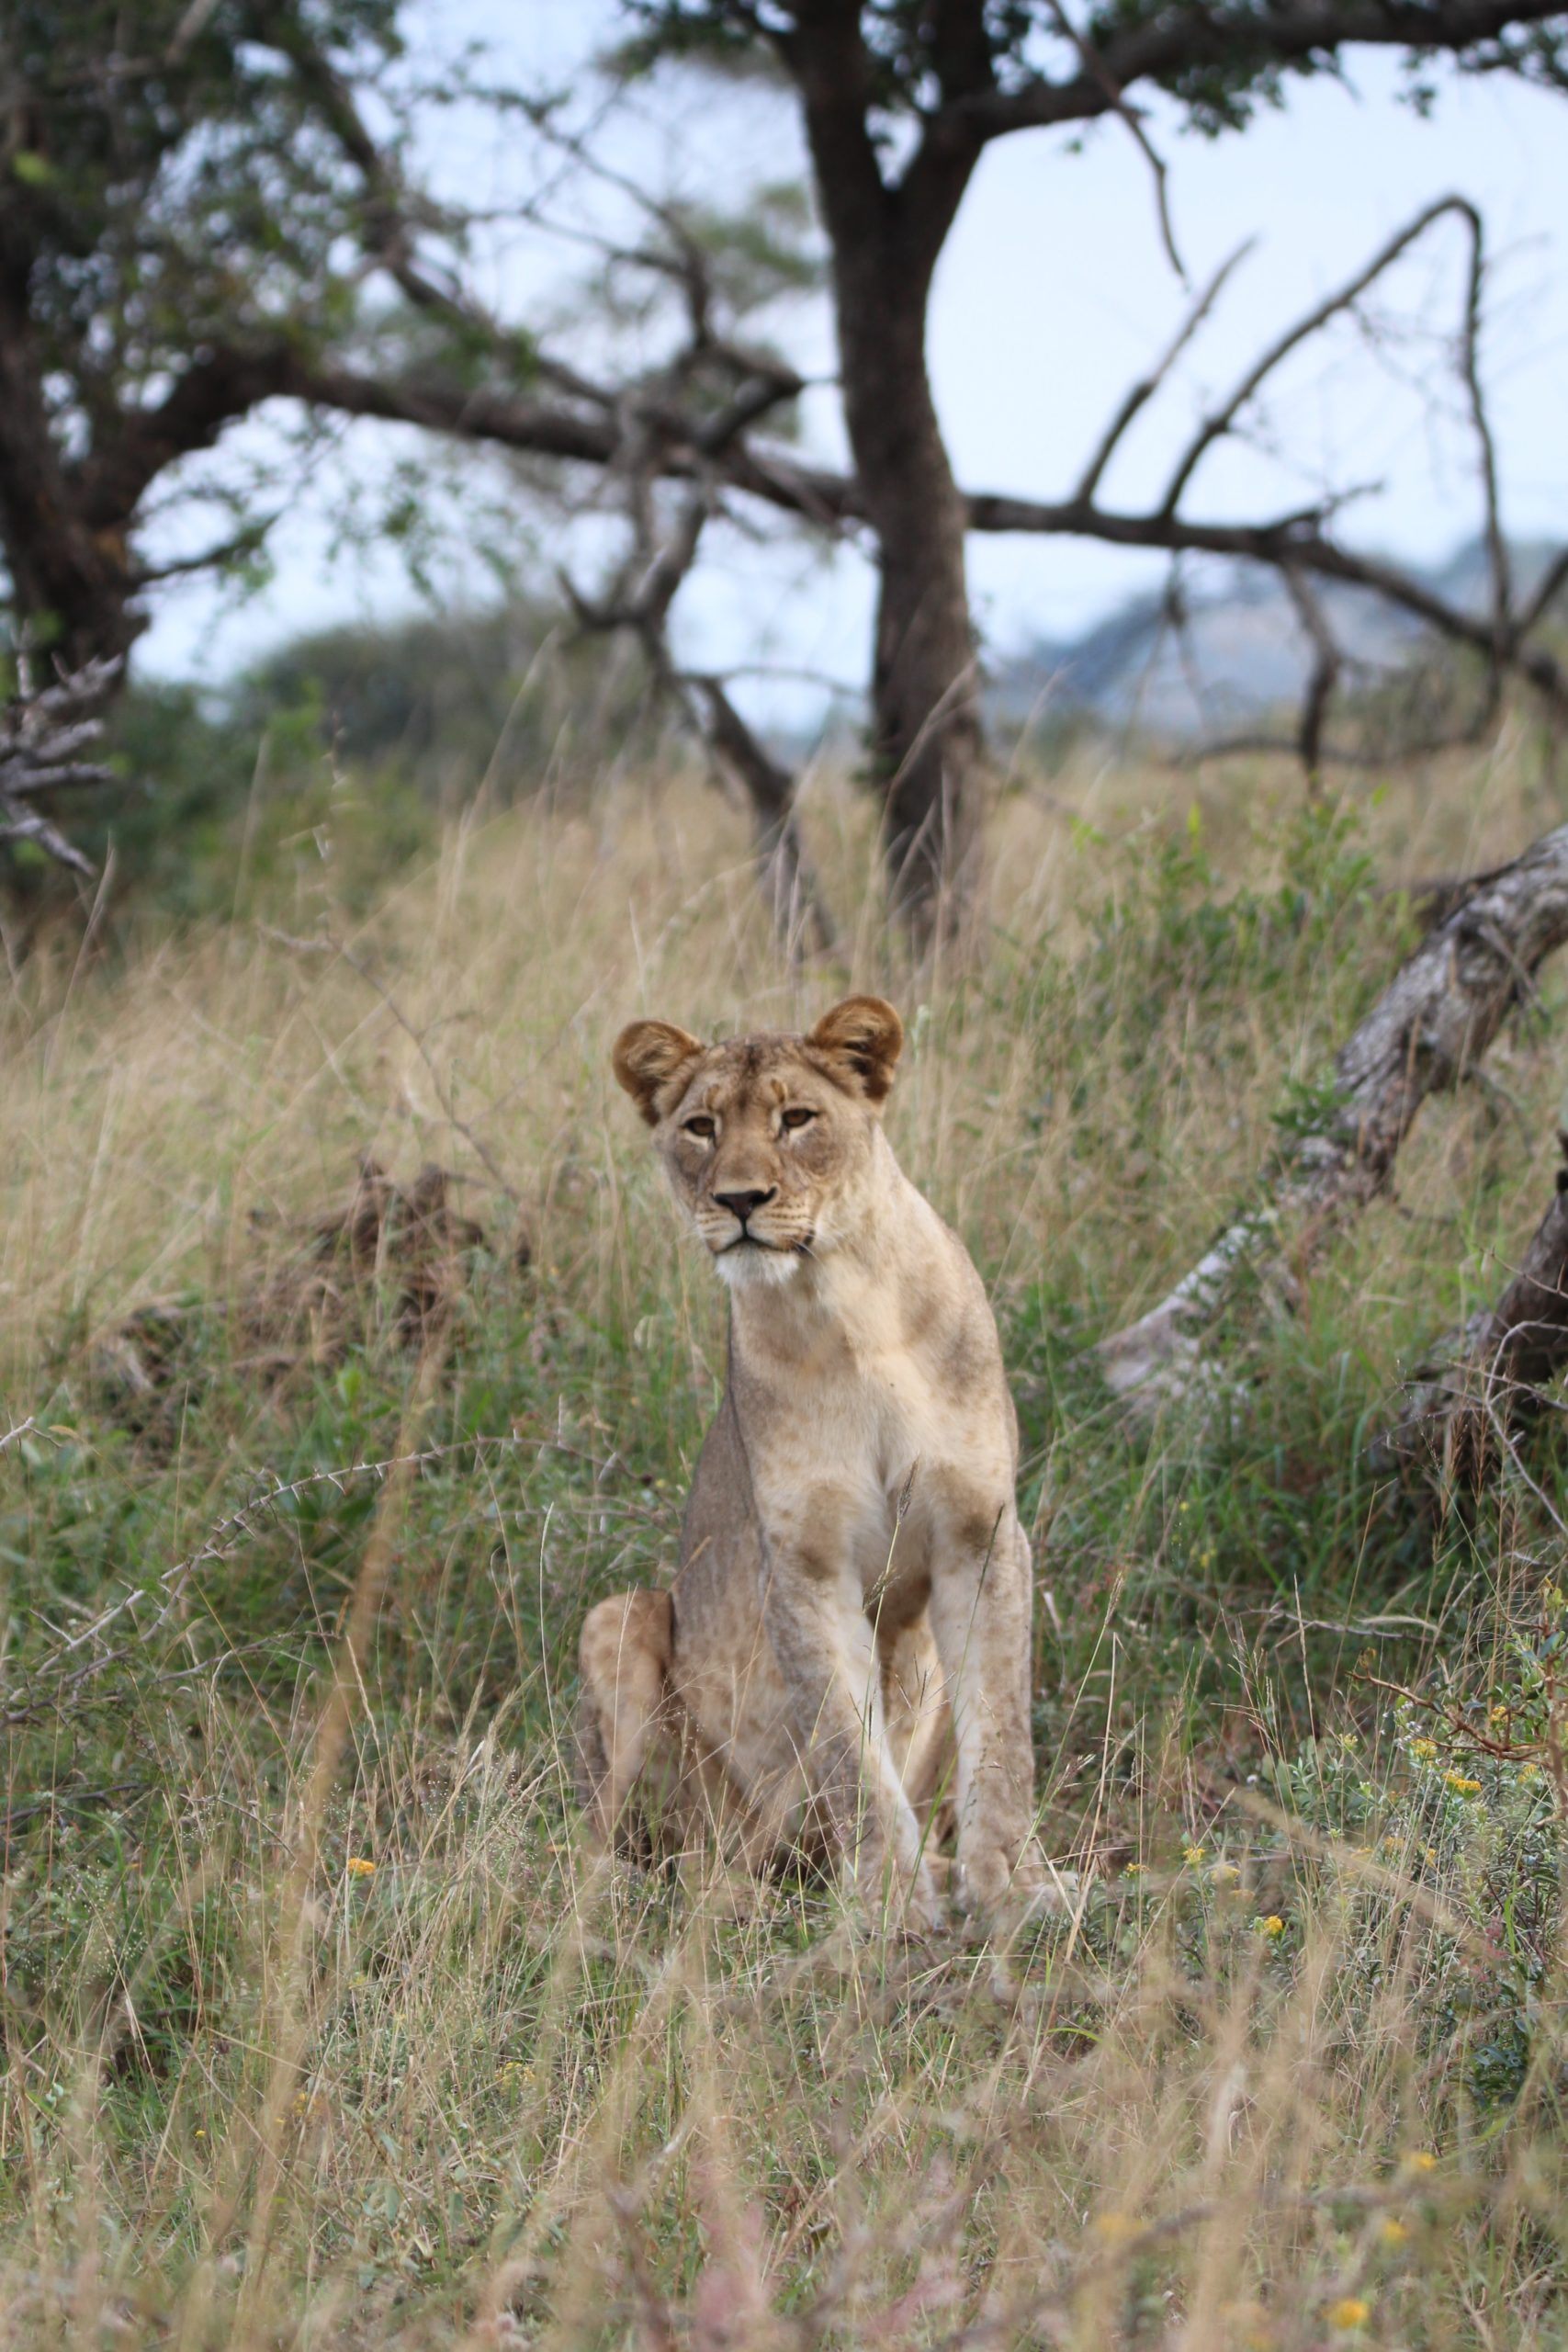 A lioness sit in the grass in South Africa